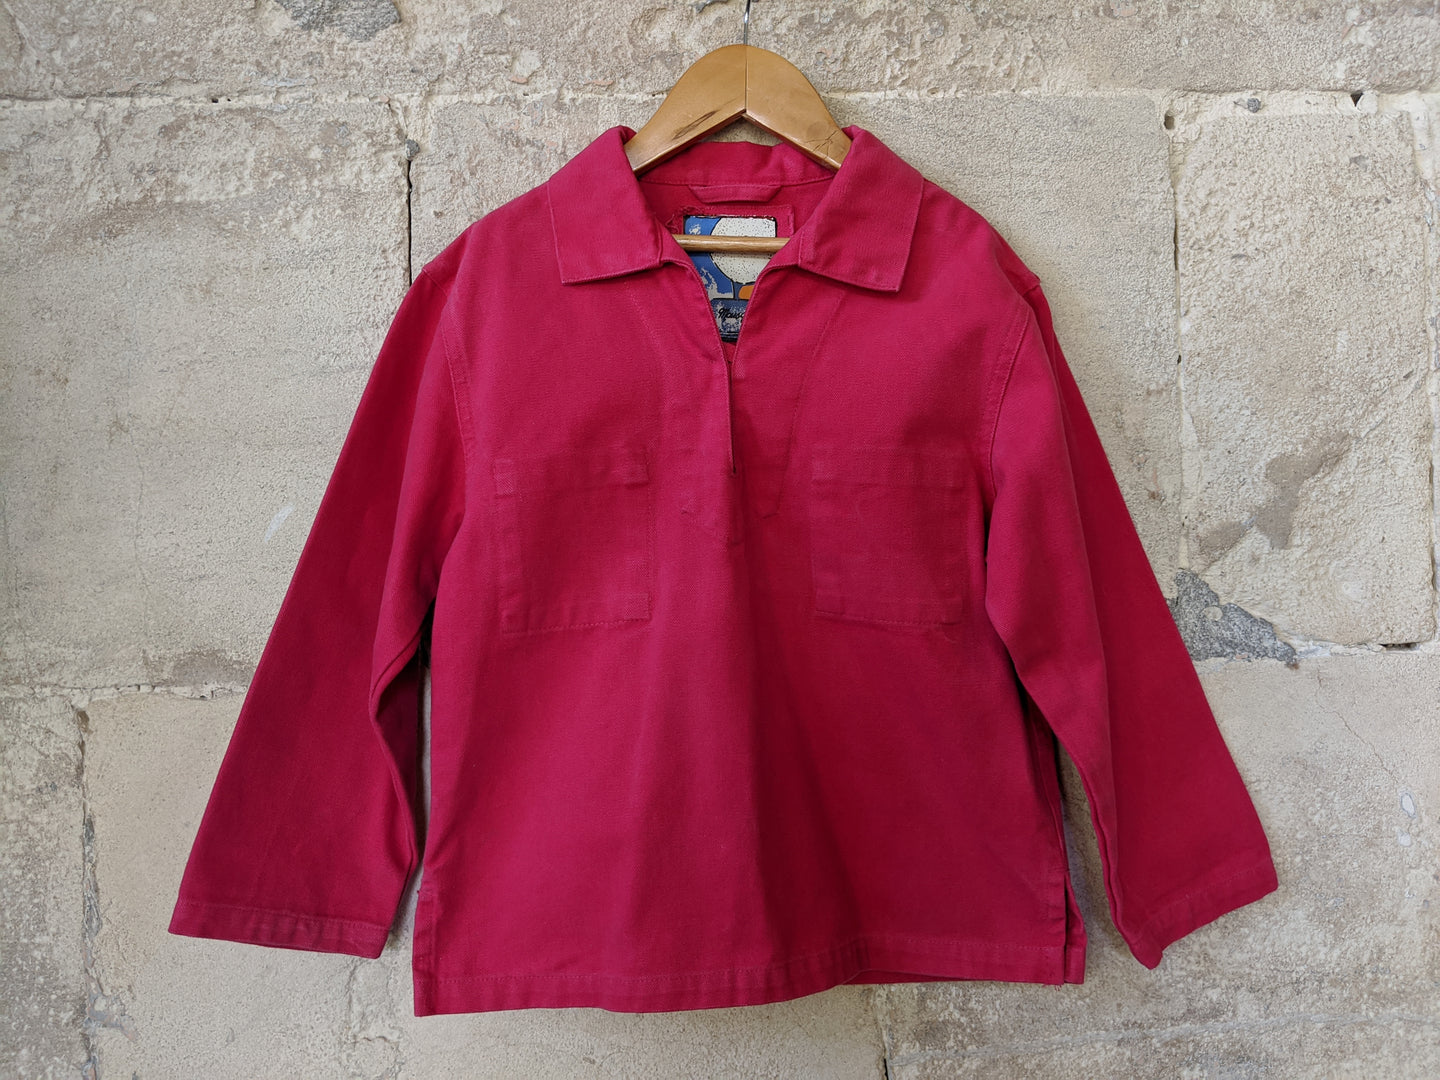 Brilliant Bright French Mousqueton Fisherman's Smock Top 7 Years